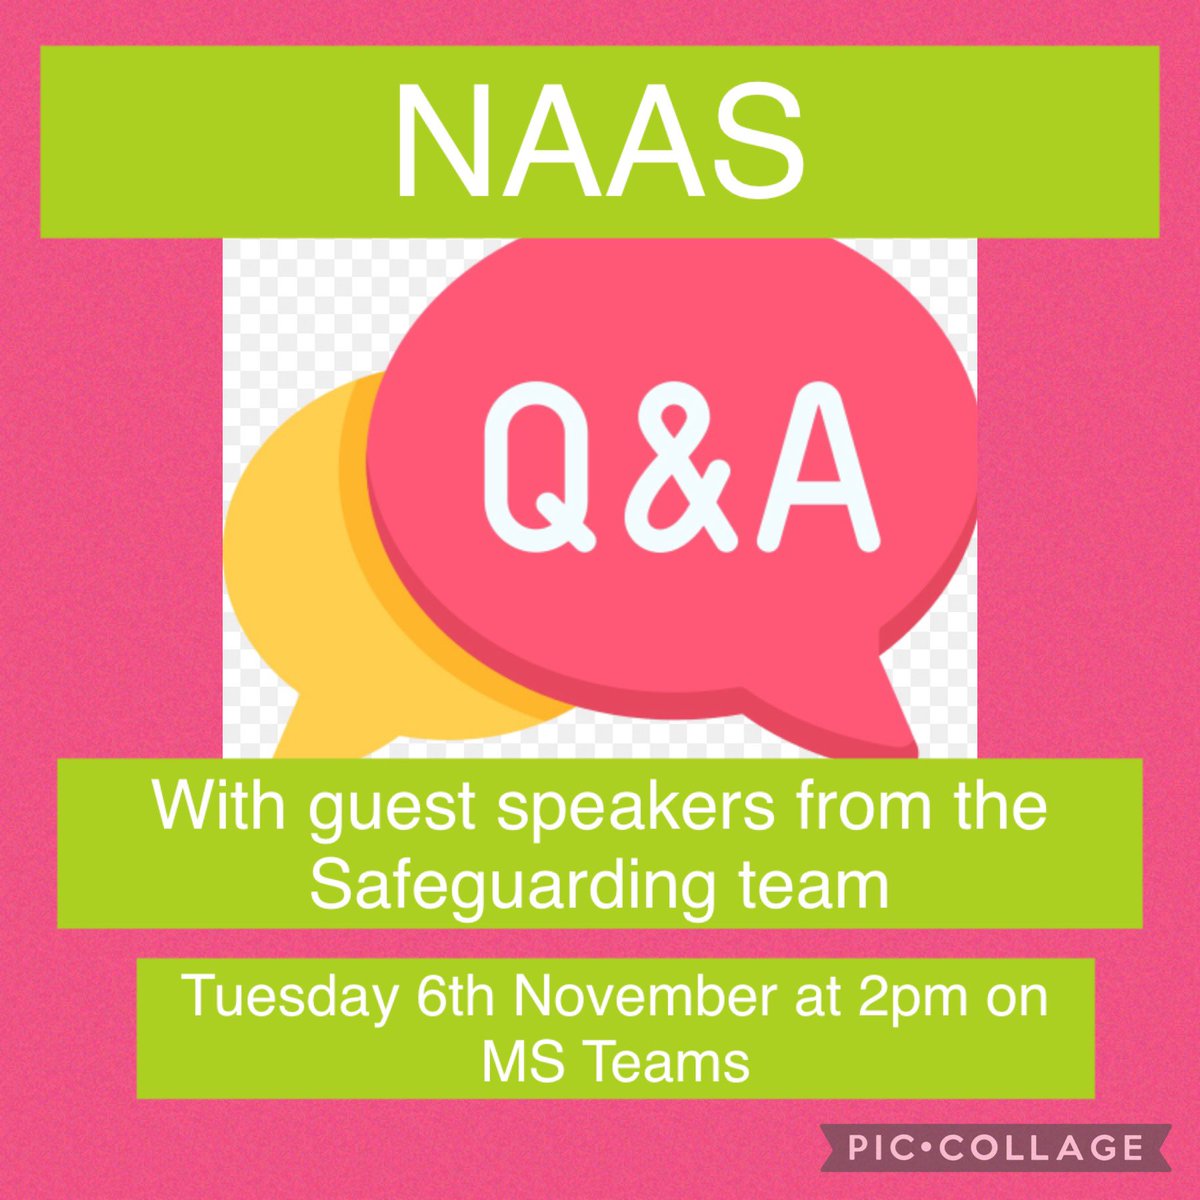 🚨 TOMORROW is time for the NAAS monthly Q&A session and this month we are going to be joined by the Safeguarding team who will be open to any questions you have 🚨 @hcarterrje @jacqui_burrow @NCAlliance_NHS @JaneGarforth1 @SalfordCO_NHS @BuryCO_NHS @RochdaleCO_NHS @OldhamCO_NHS